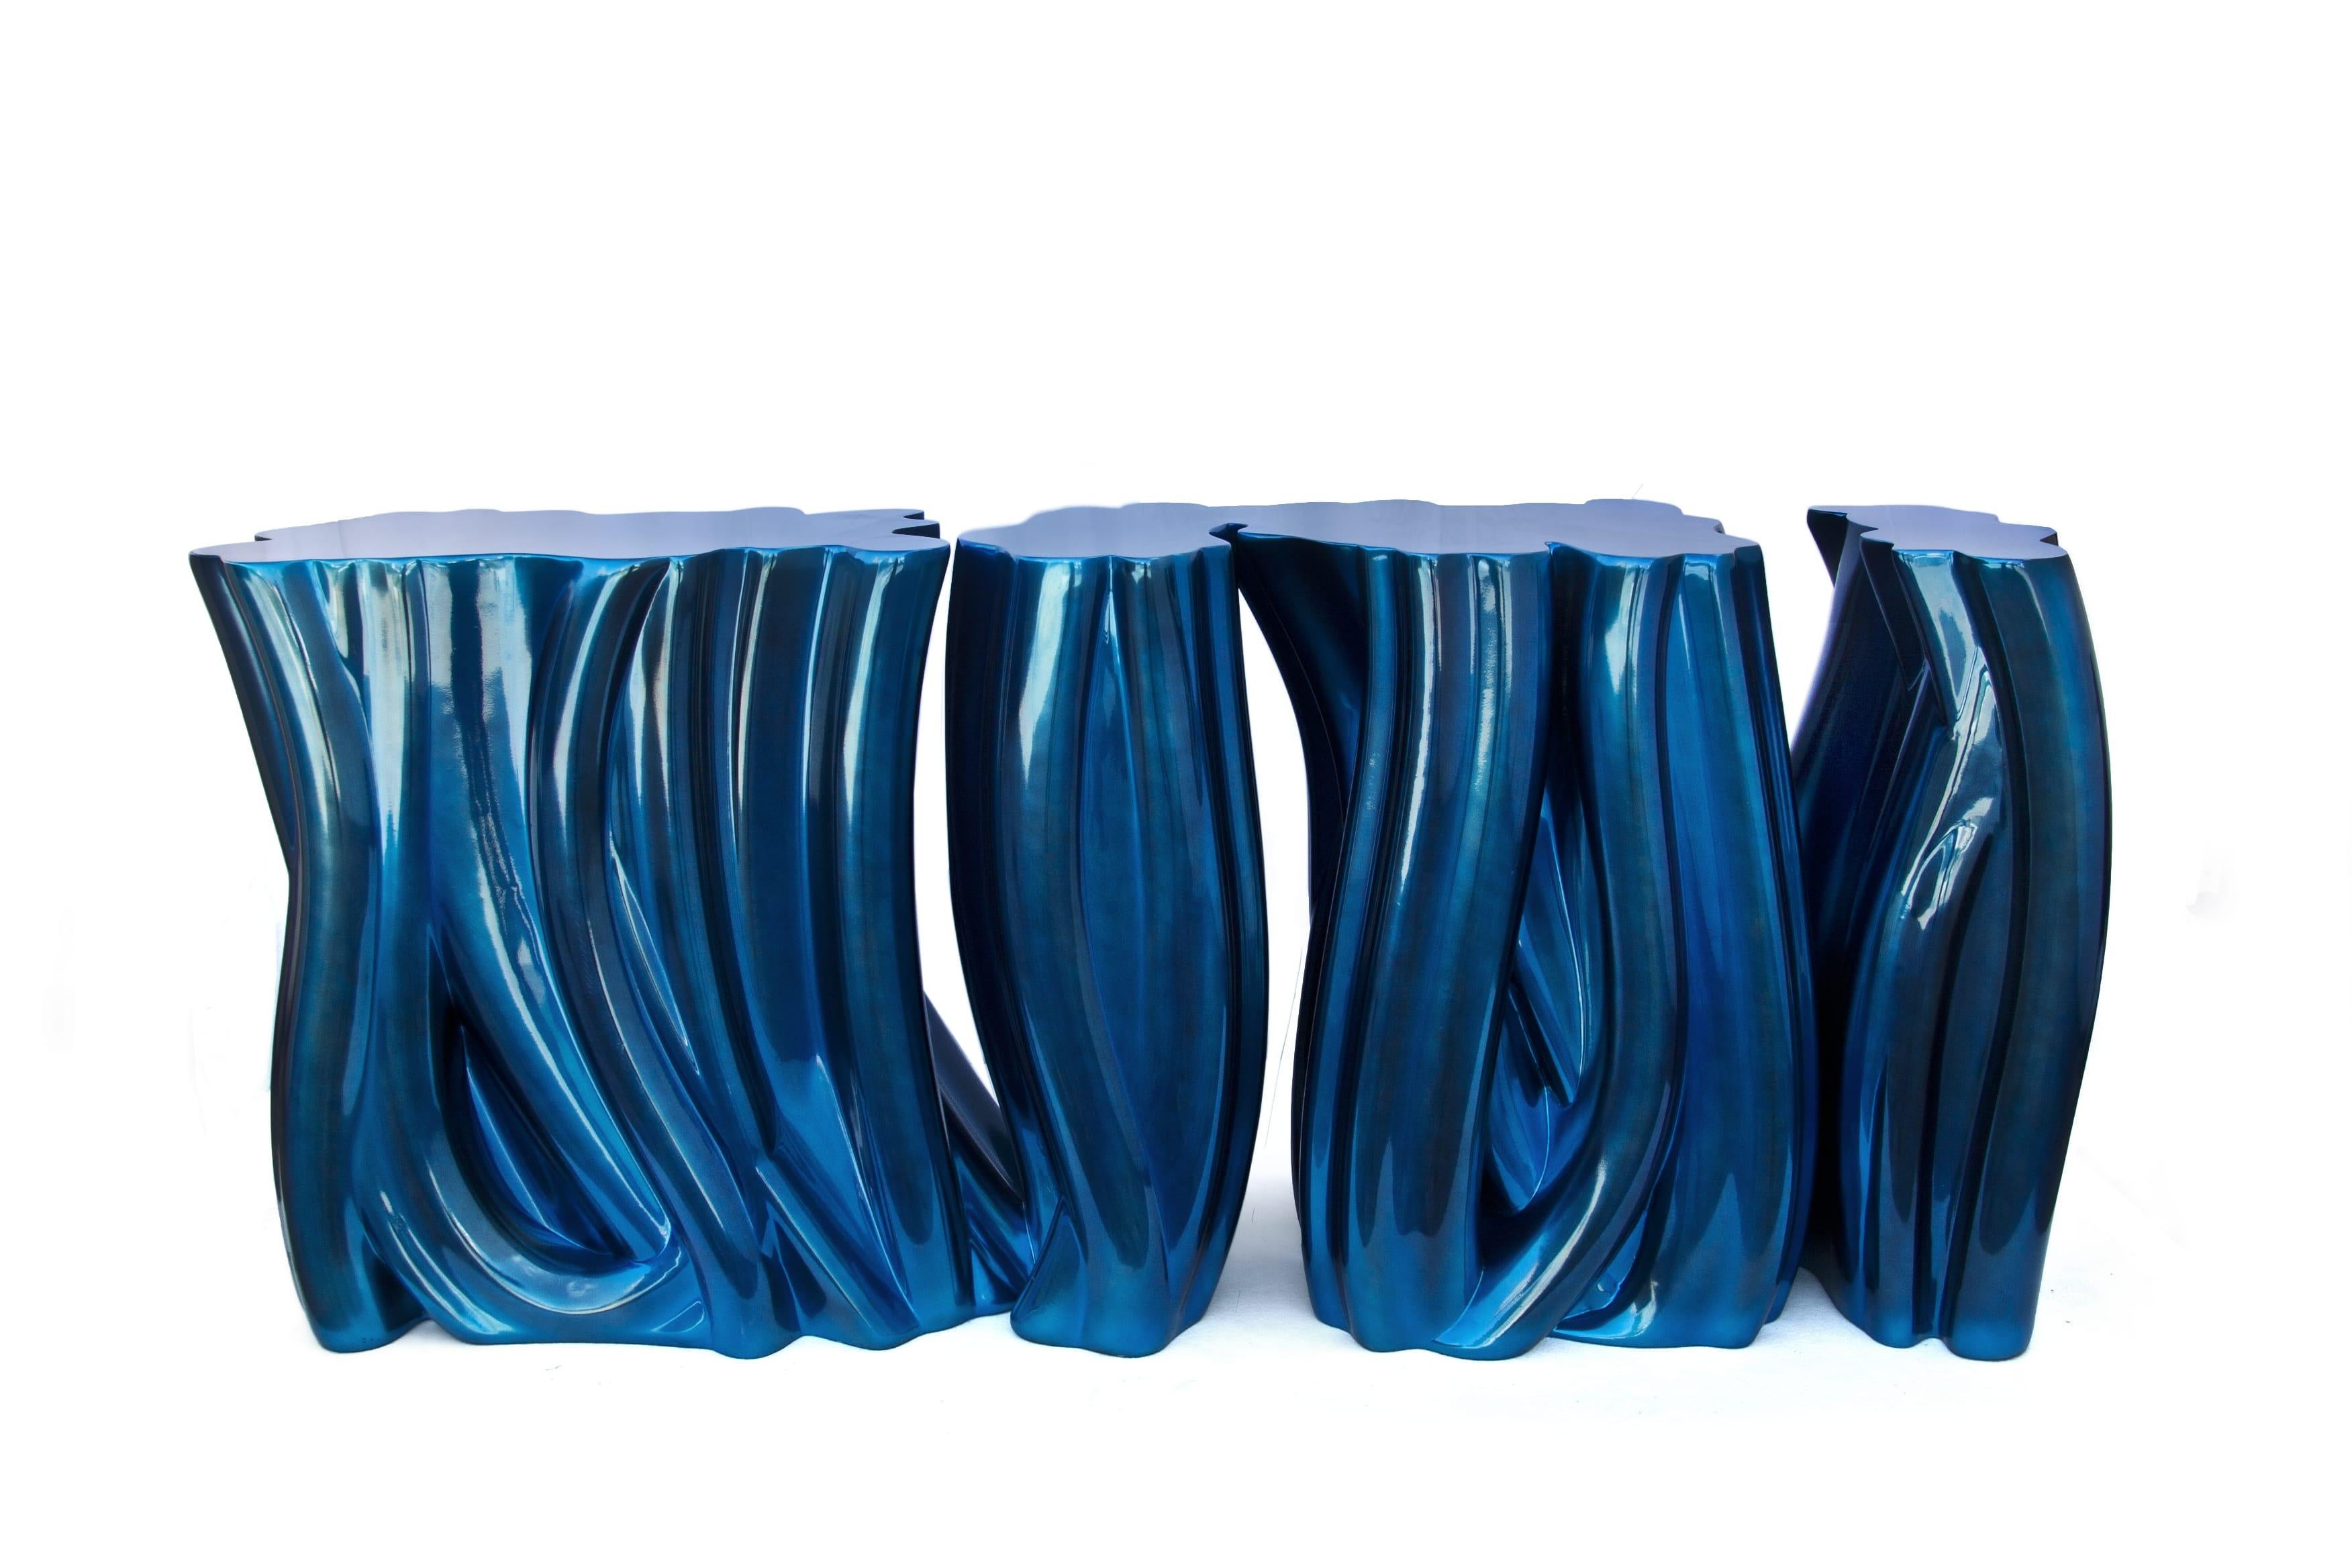 Monochrome Console in Electric Blue in Molded Fiberglass In Excellent Condition For Sale In New York, NY